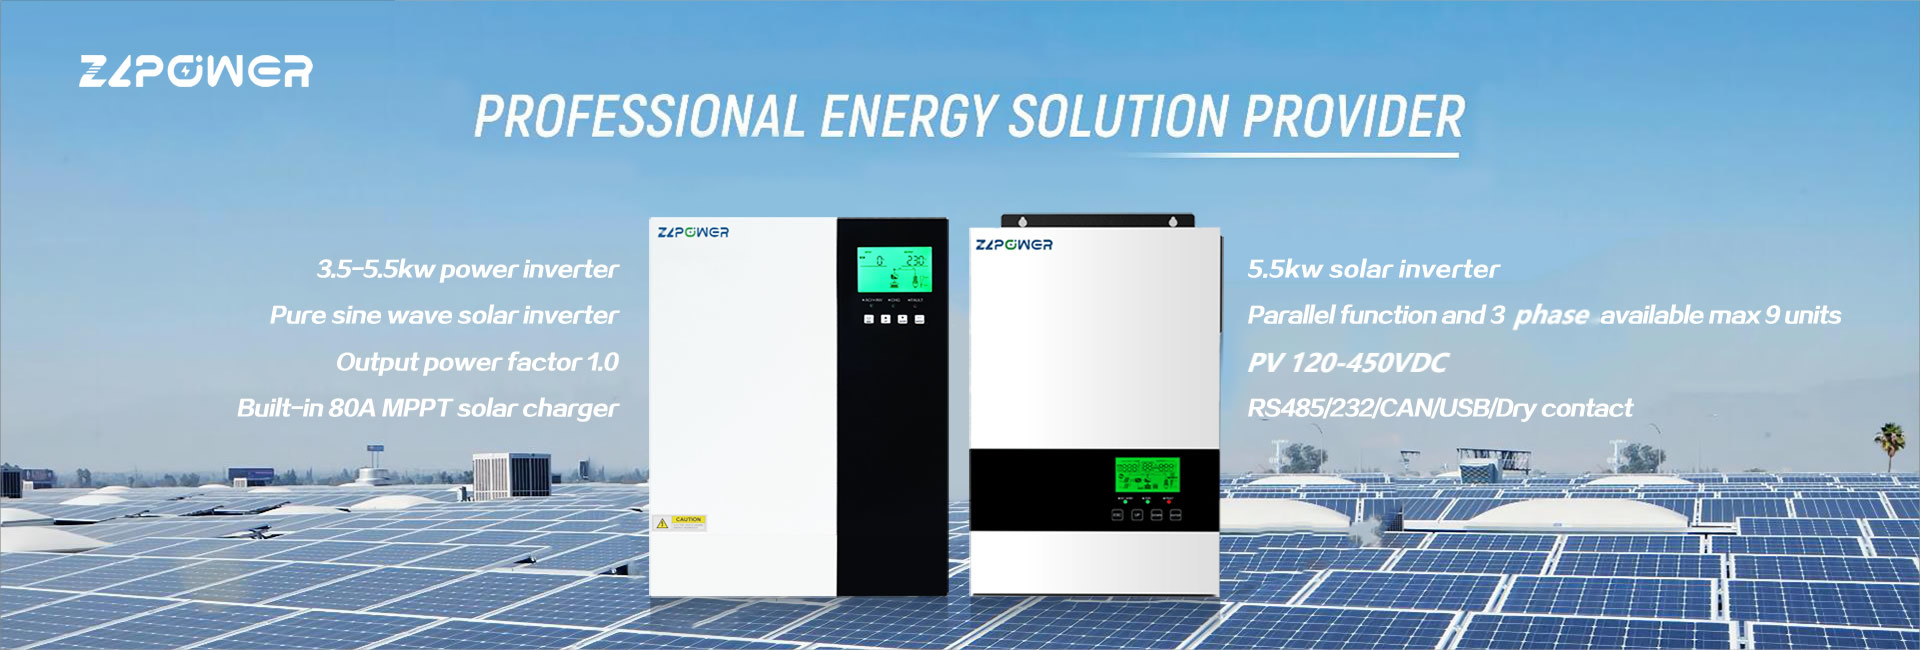 PROFESSIONAL ENERGY SOLUTION PROVIDER